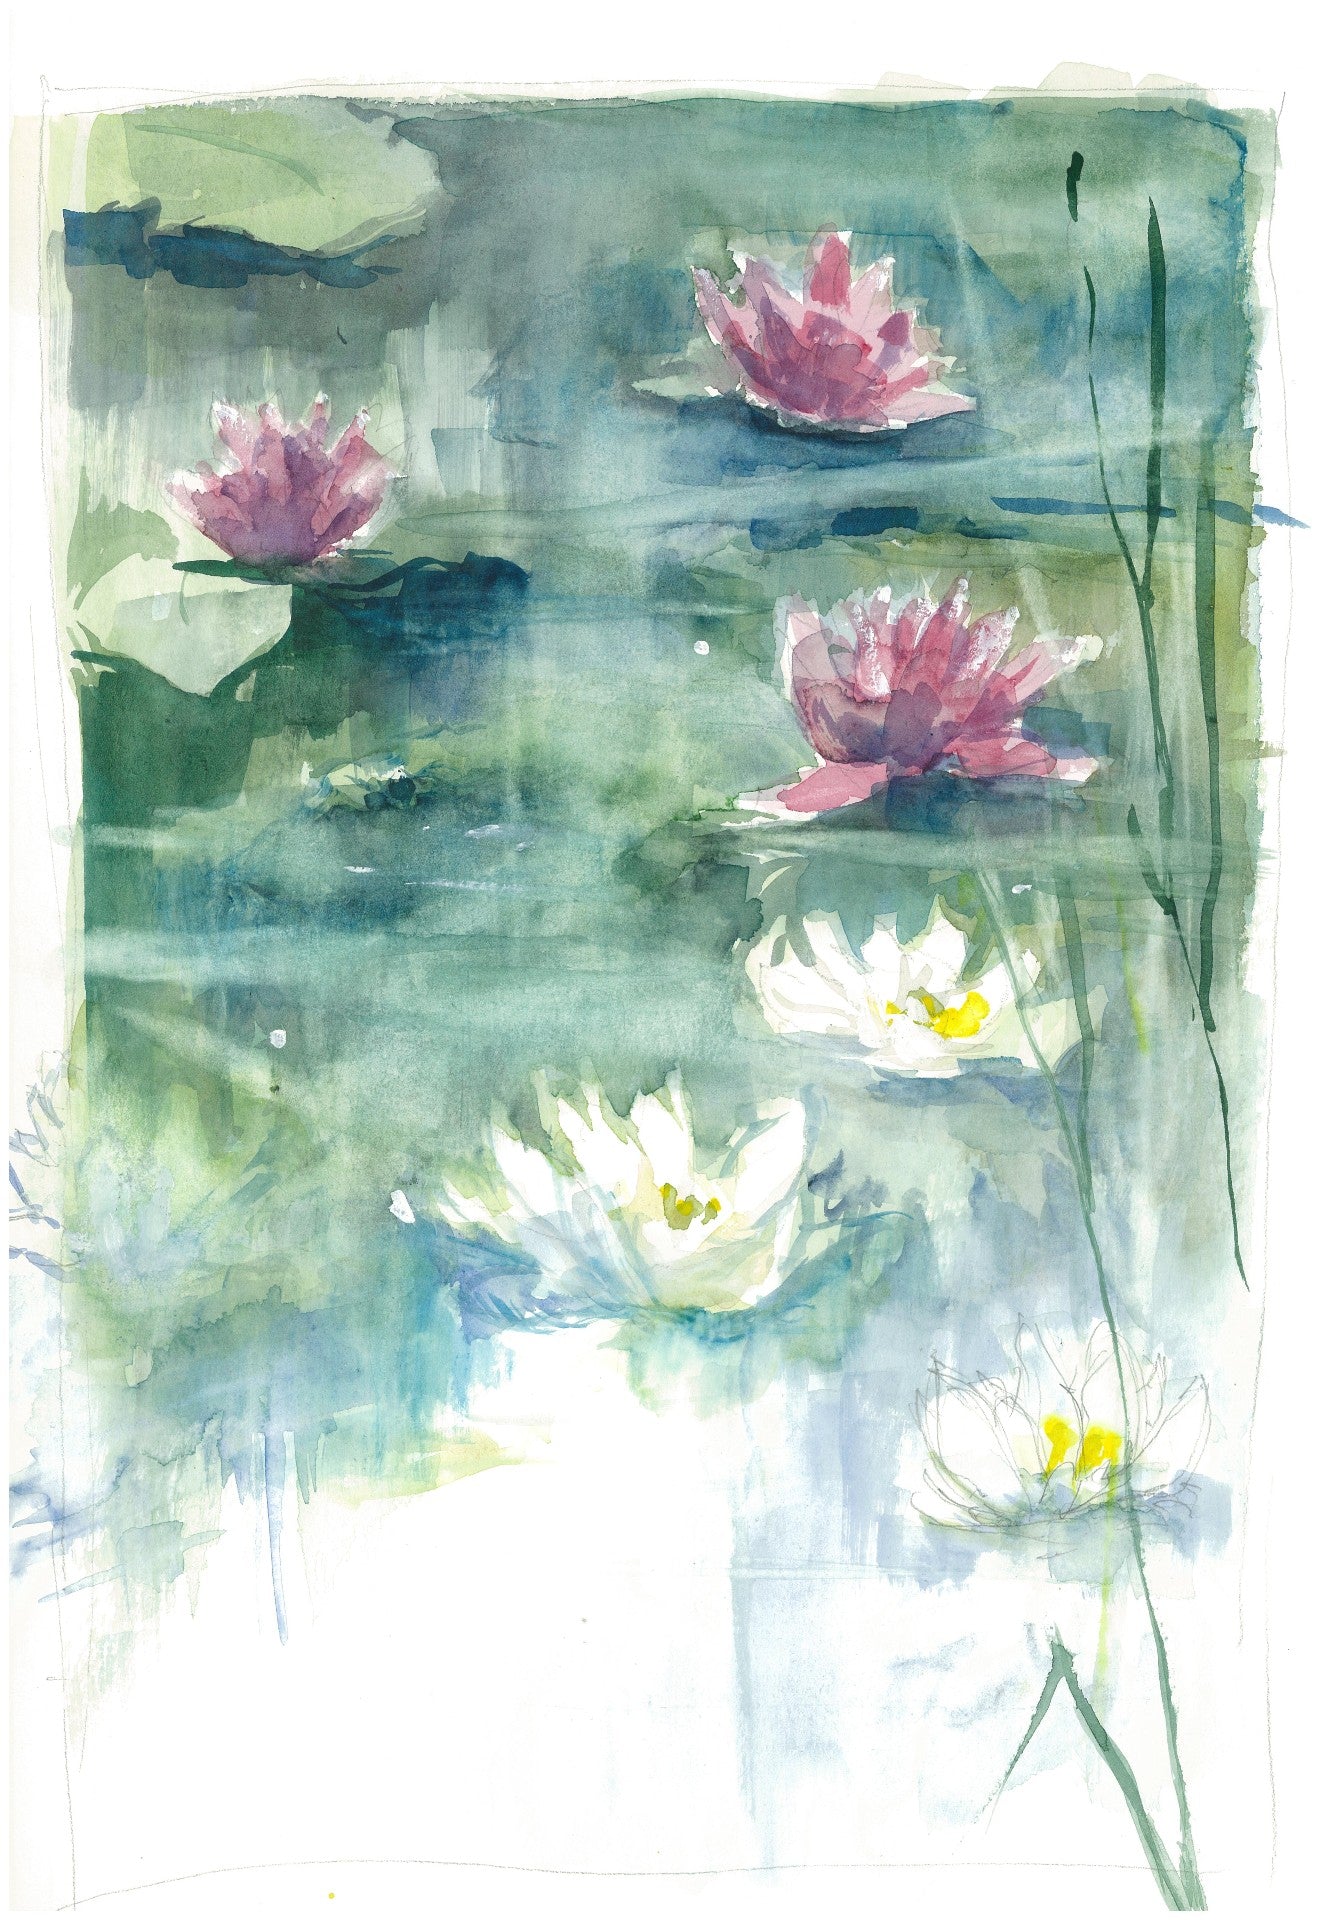 The Water Lilies - Isabelle Issaverdens